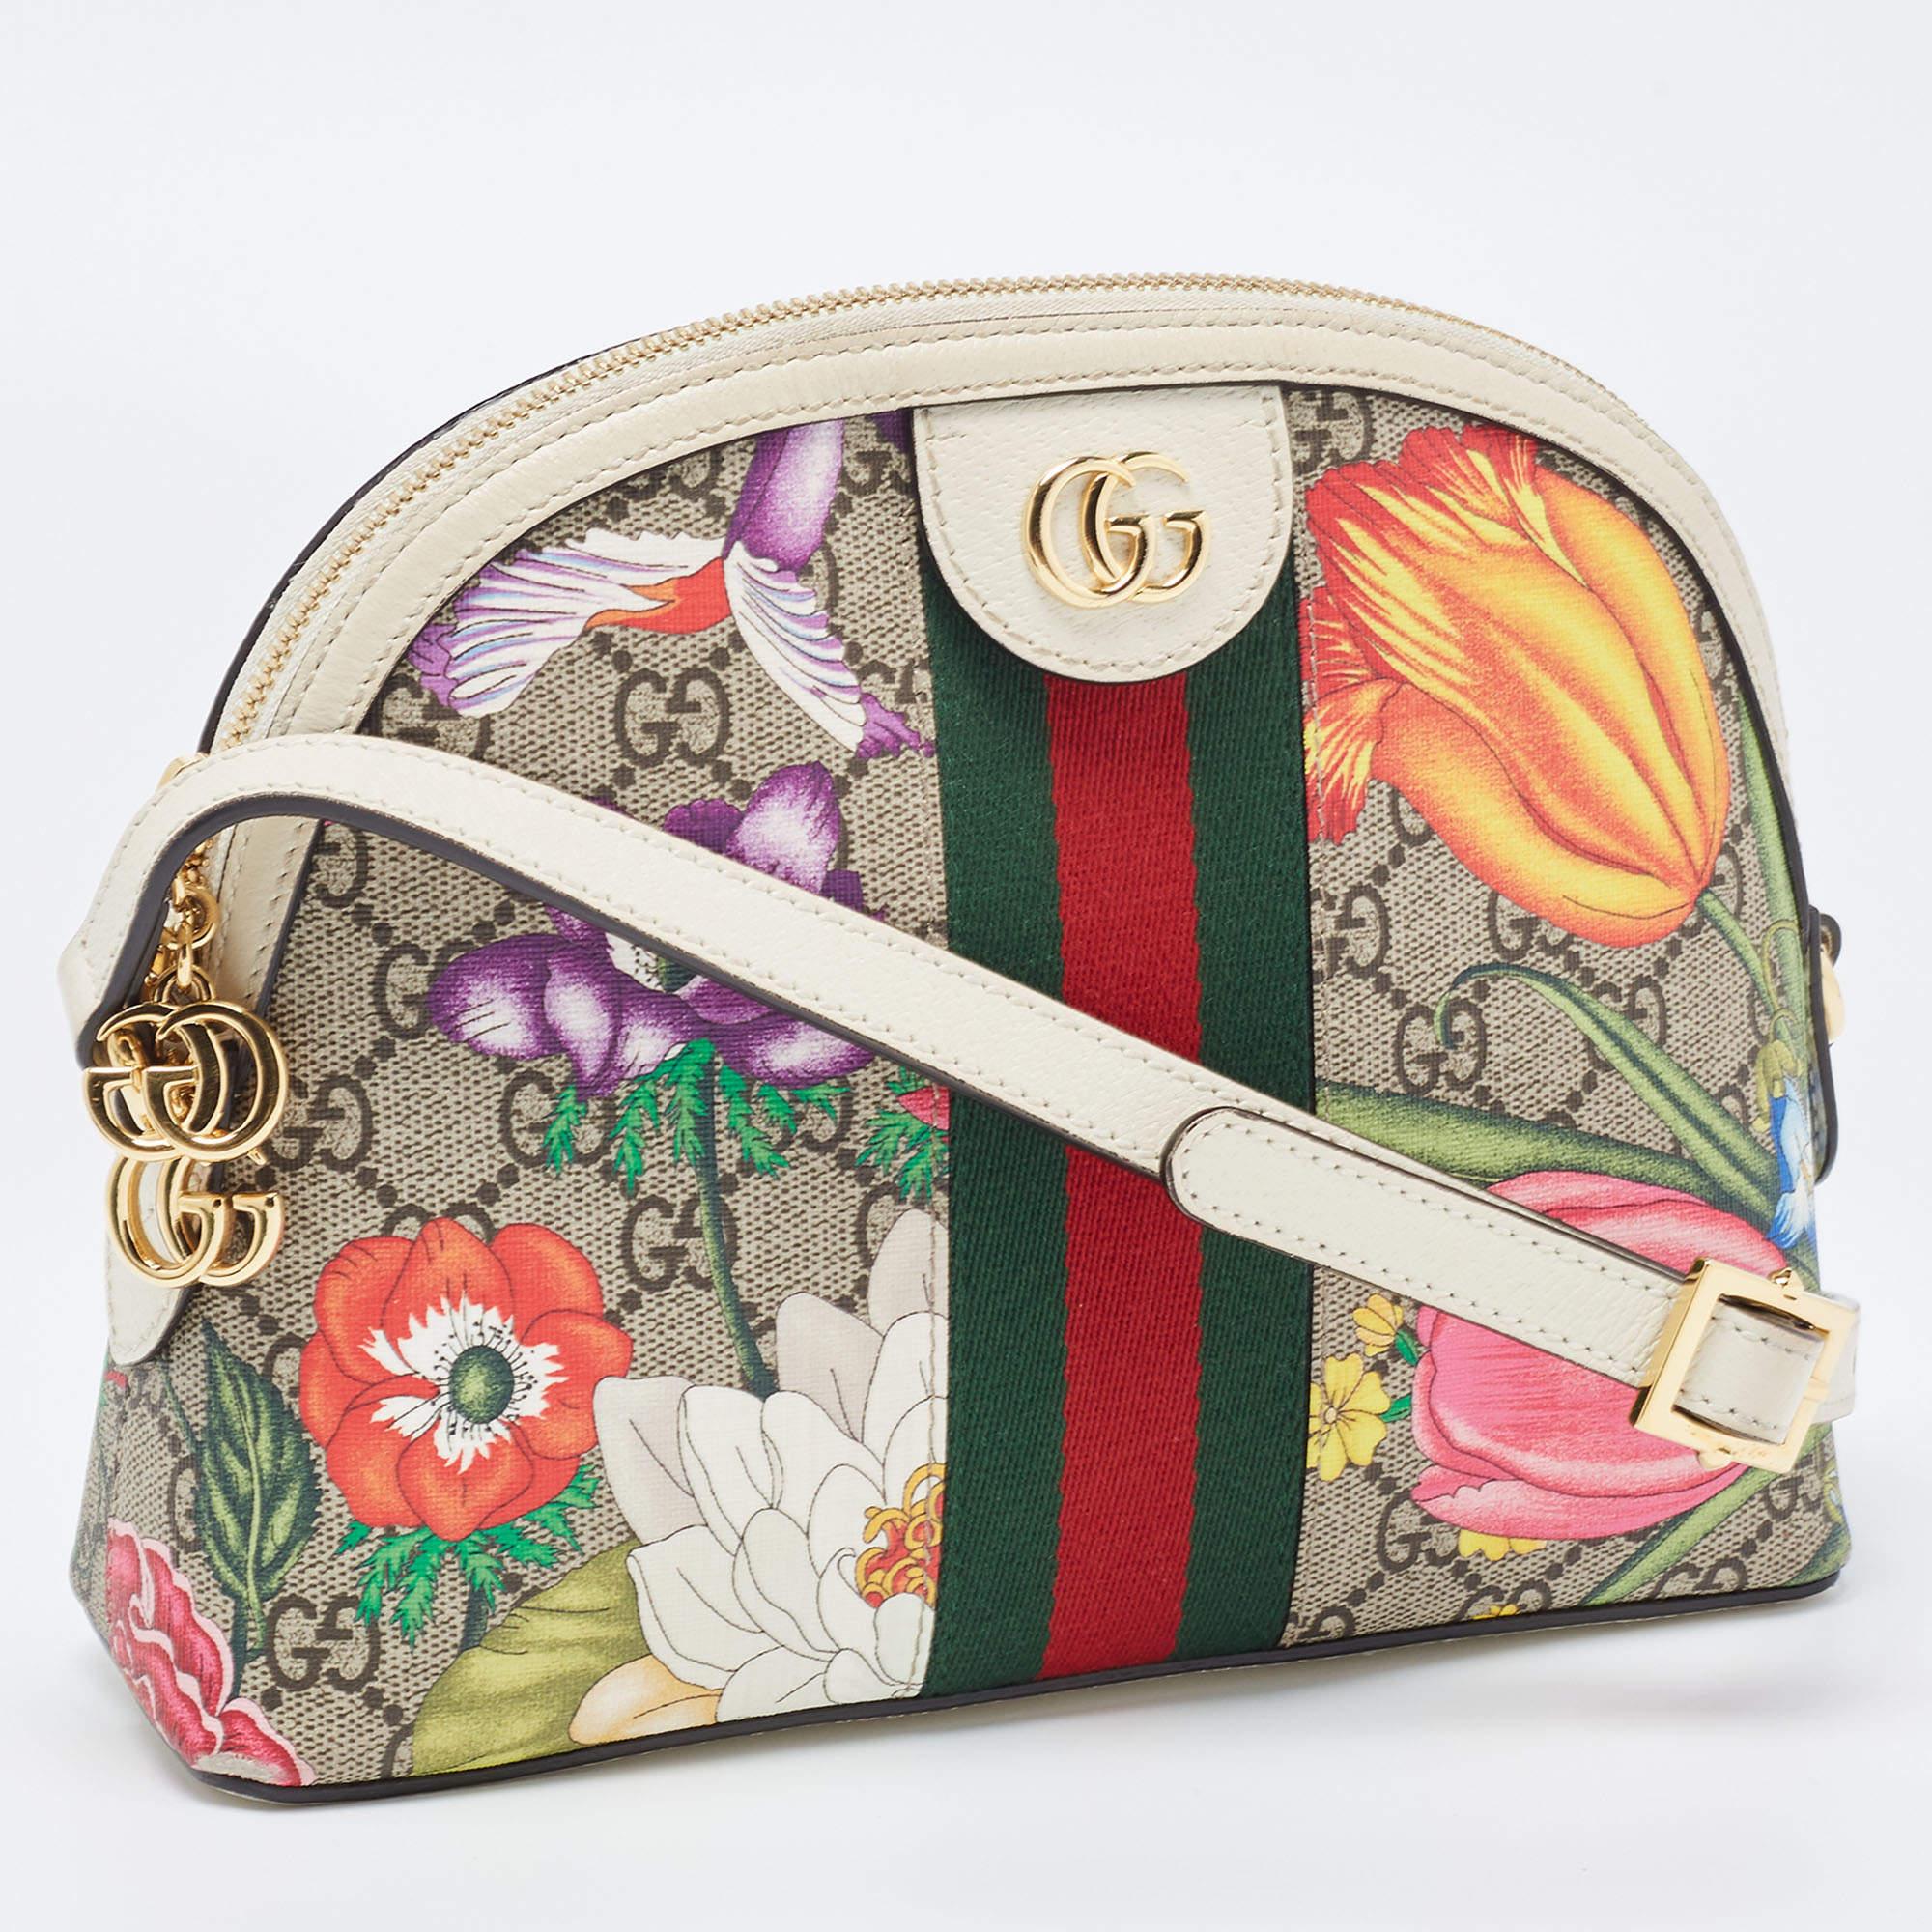 Carry everything you need in style thanks to this Gucci bag. Crafted from the best materials, this is an accessory that promises enduring style and usage.

